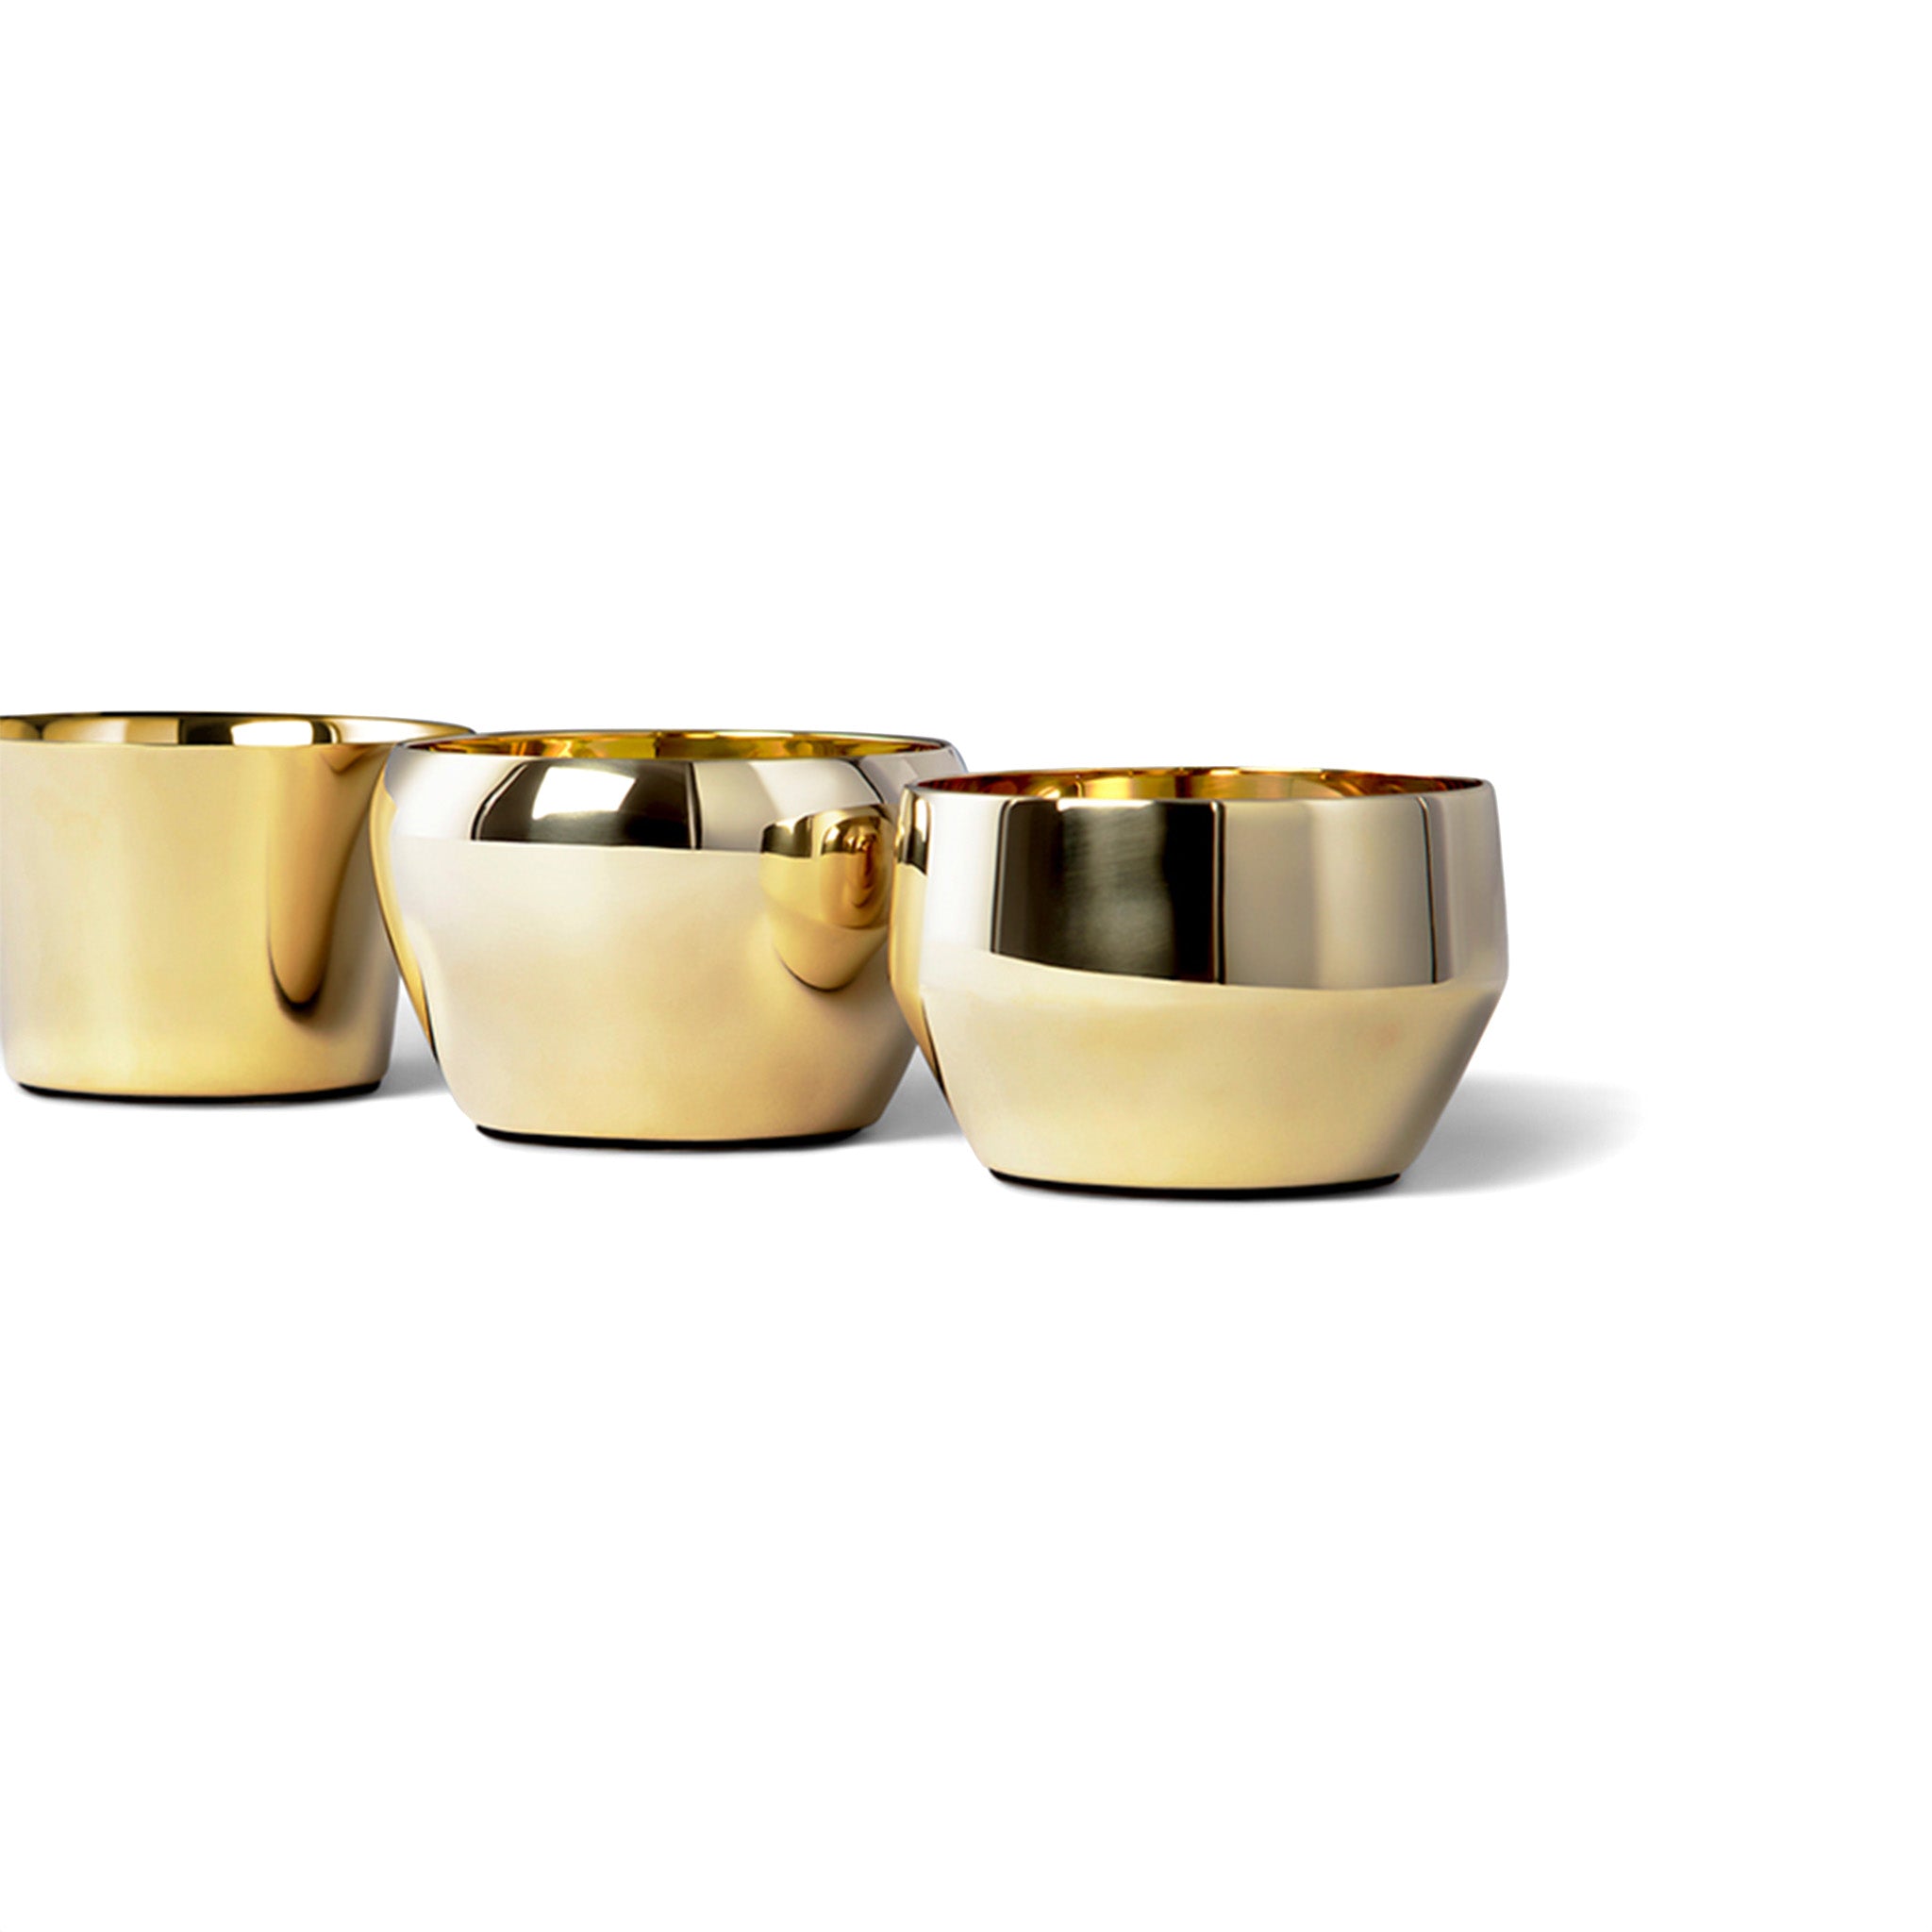 three brass tealights by skultuna sitting next to each other in a close up side view